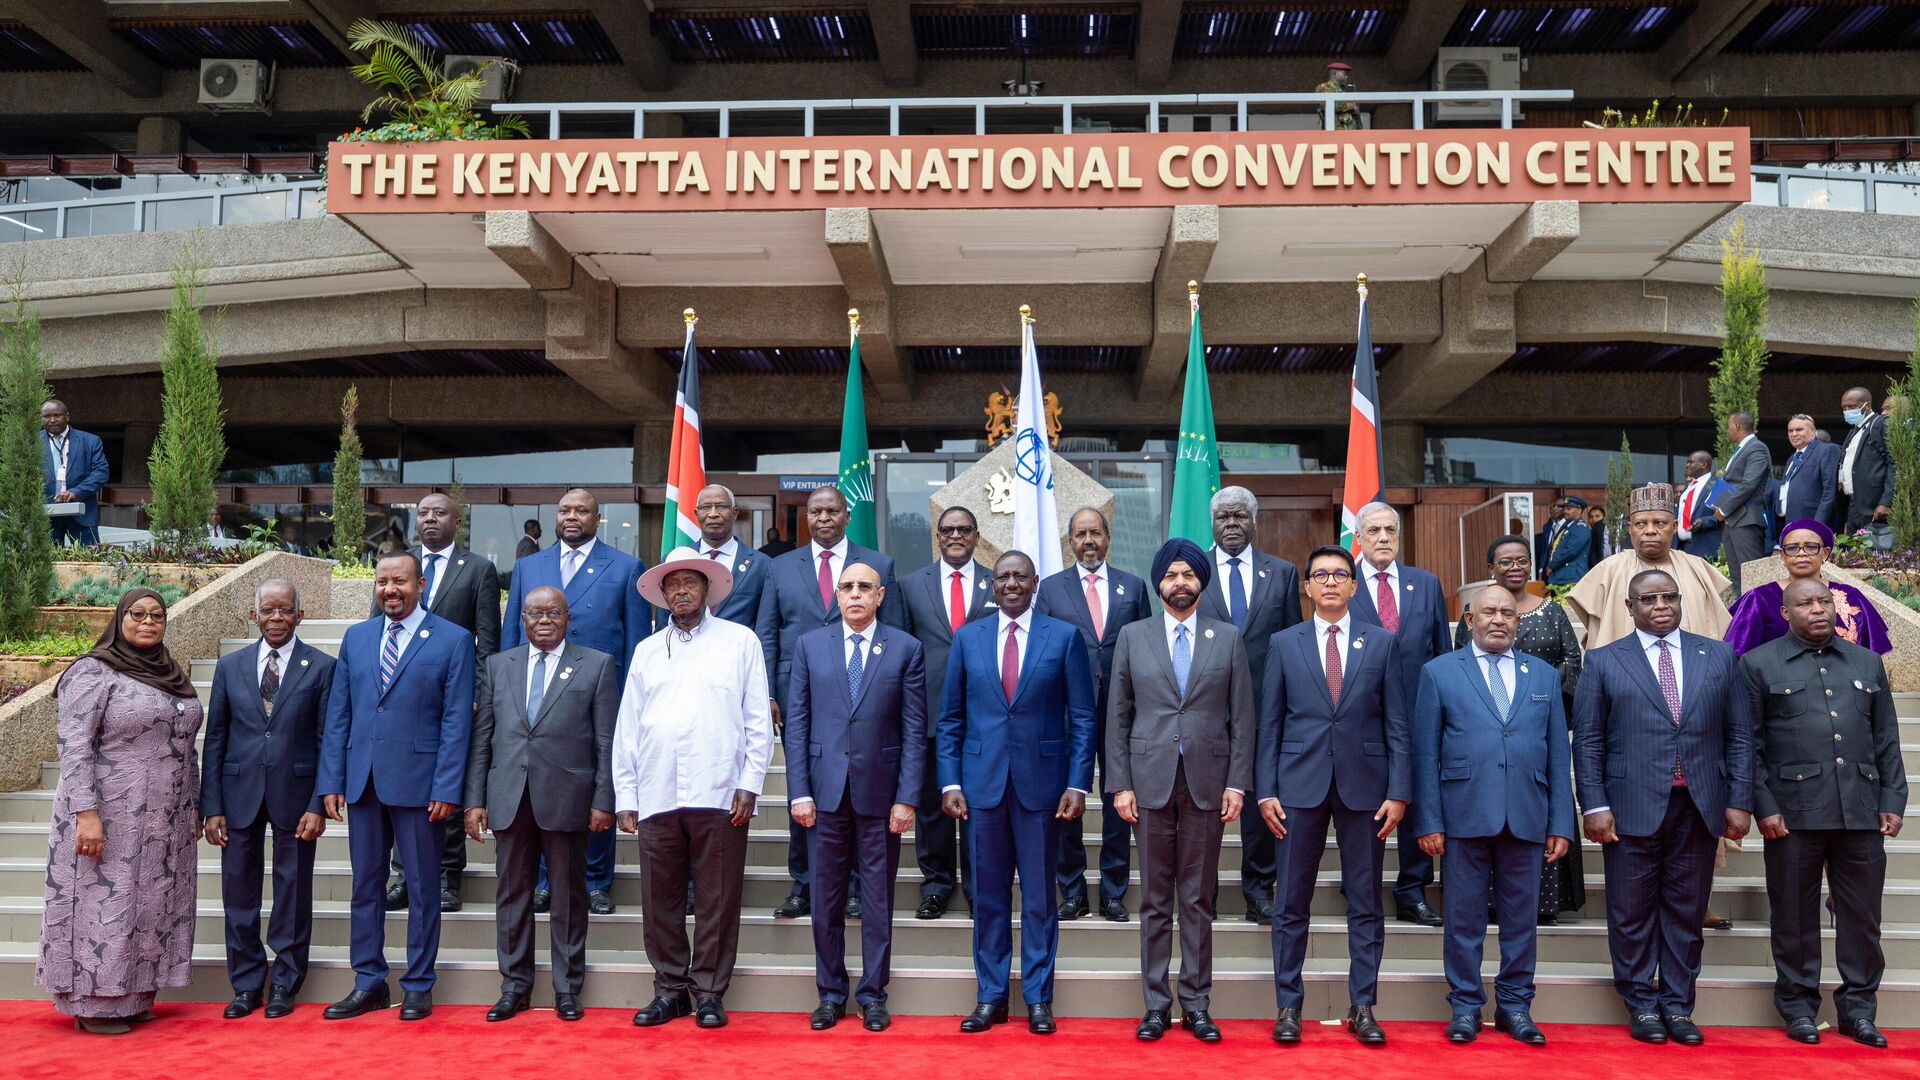 African heads of states meet in Nairobi for World Bank summit